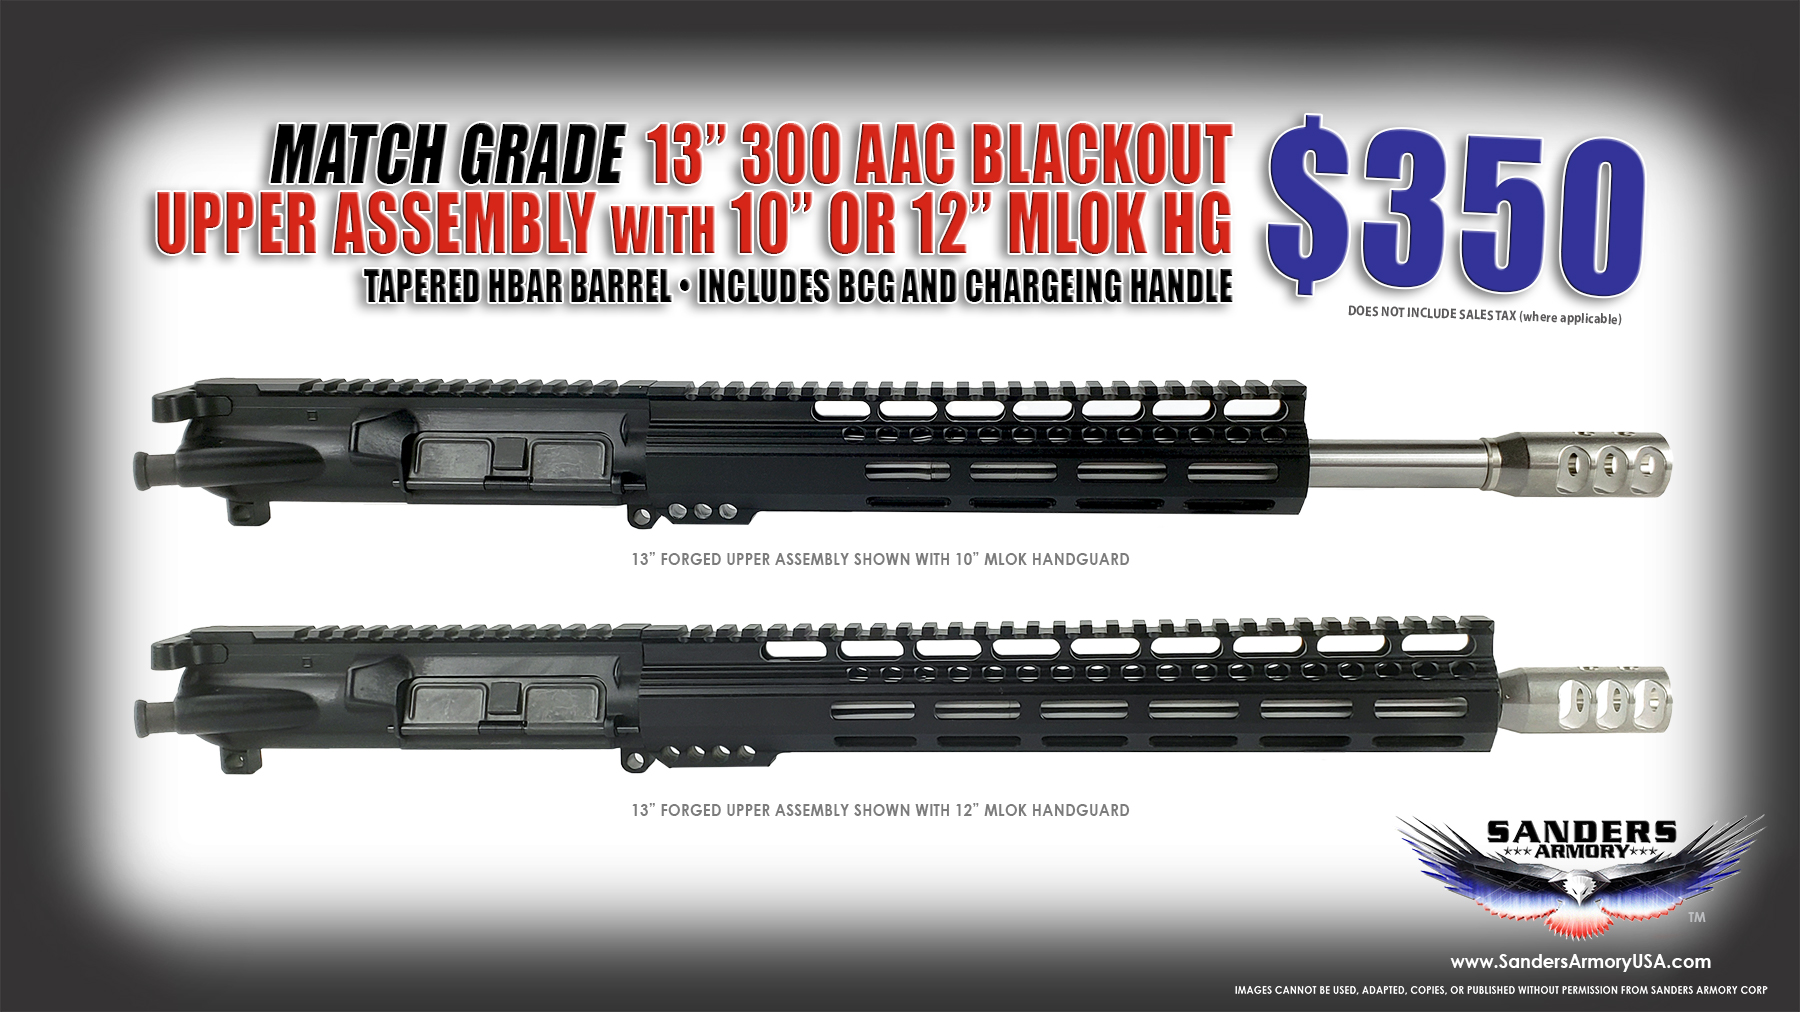 Sanders Armory Match Grade AR15 300 AAC Blackout Upper Assembly with 5R Rifling